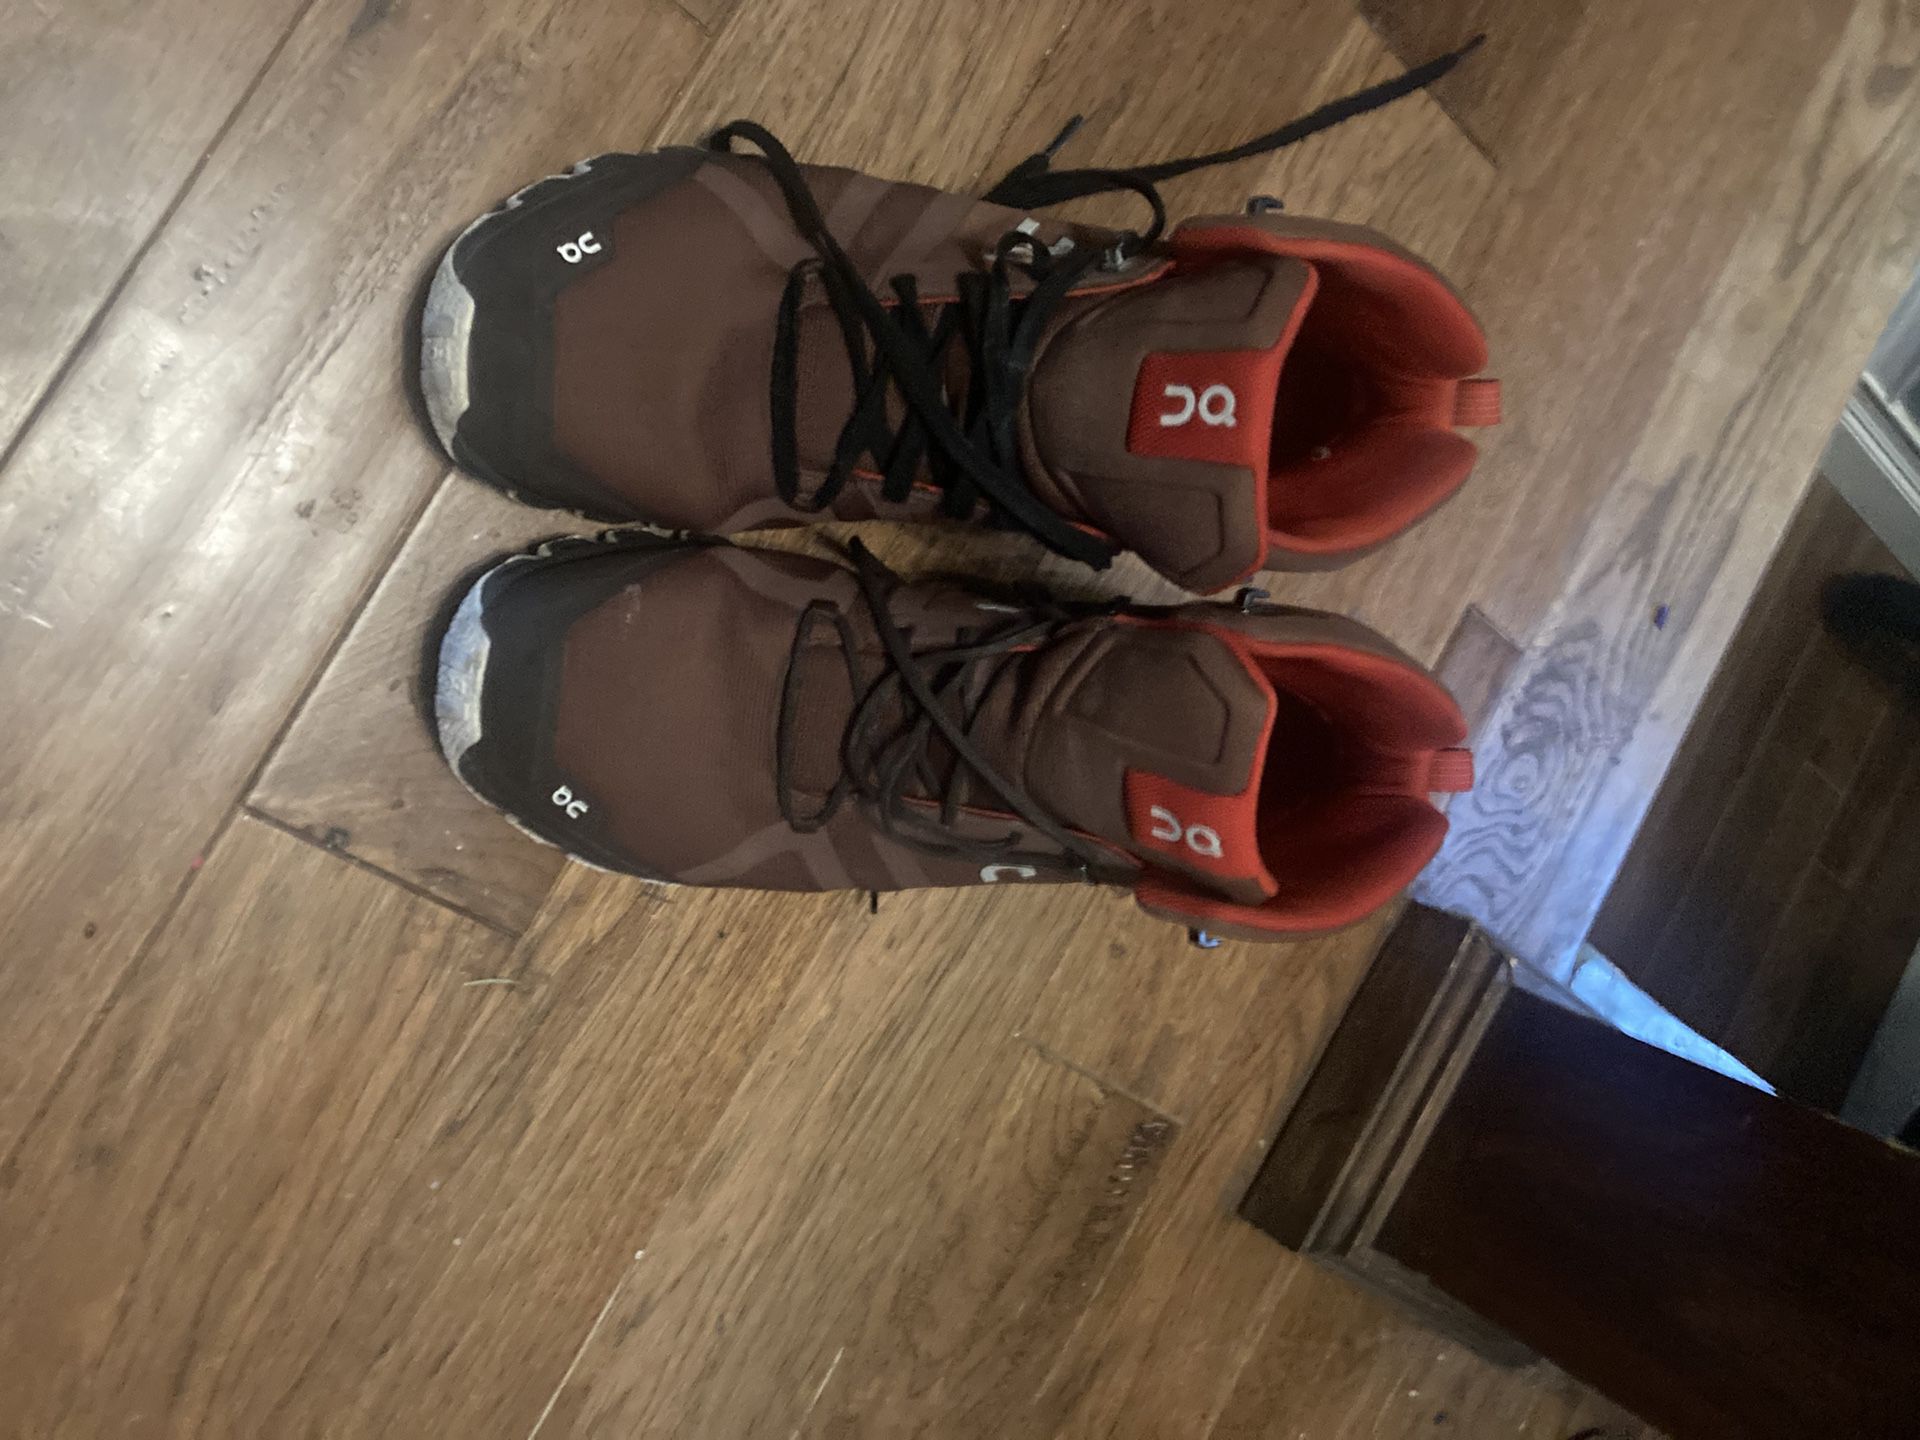 Hiking Boot Trail Runner Size 13